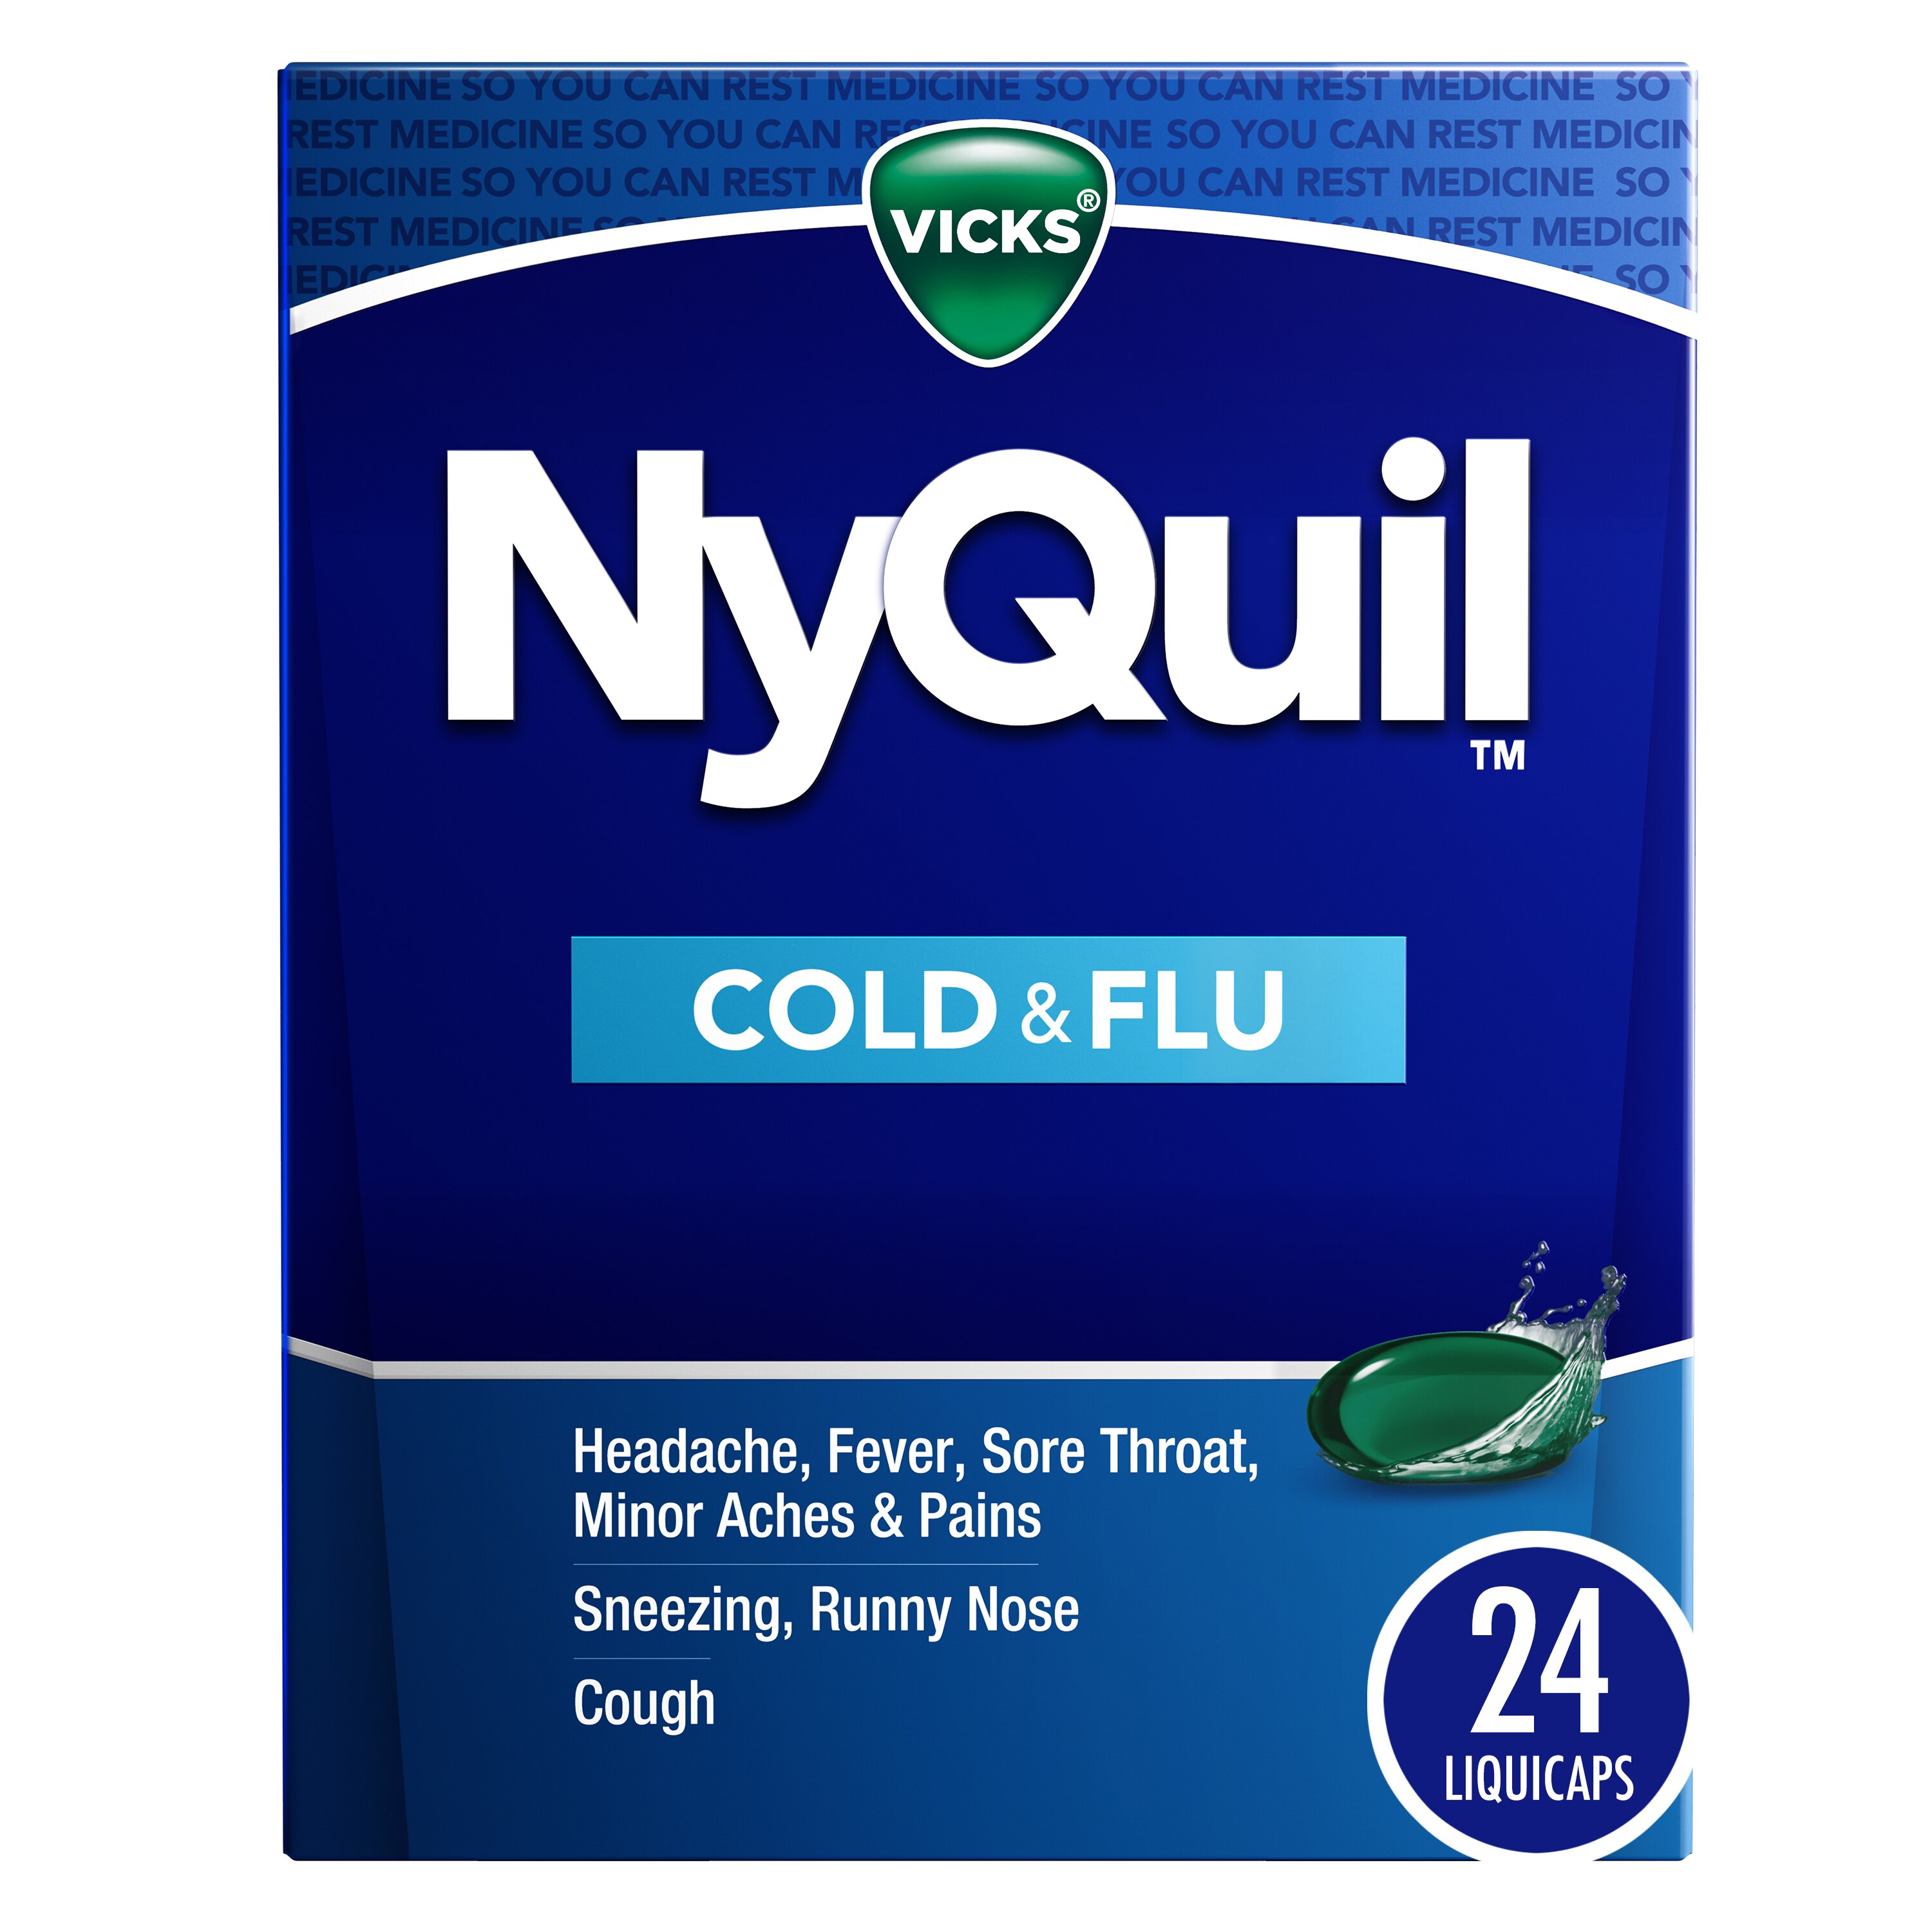 Vicks NyQuil Cough, Cold & Flu Nighttime Relief, 24 LiquiCaps - #1 Pharmacist Recommended  Nighttime Sore Throat, Fever, And Congestion Relief